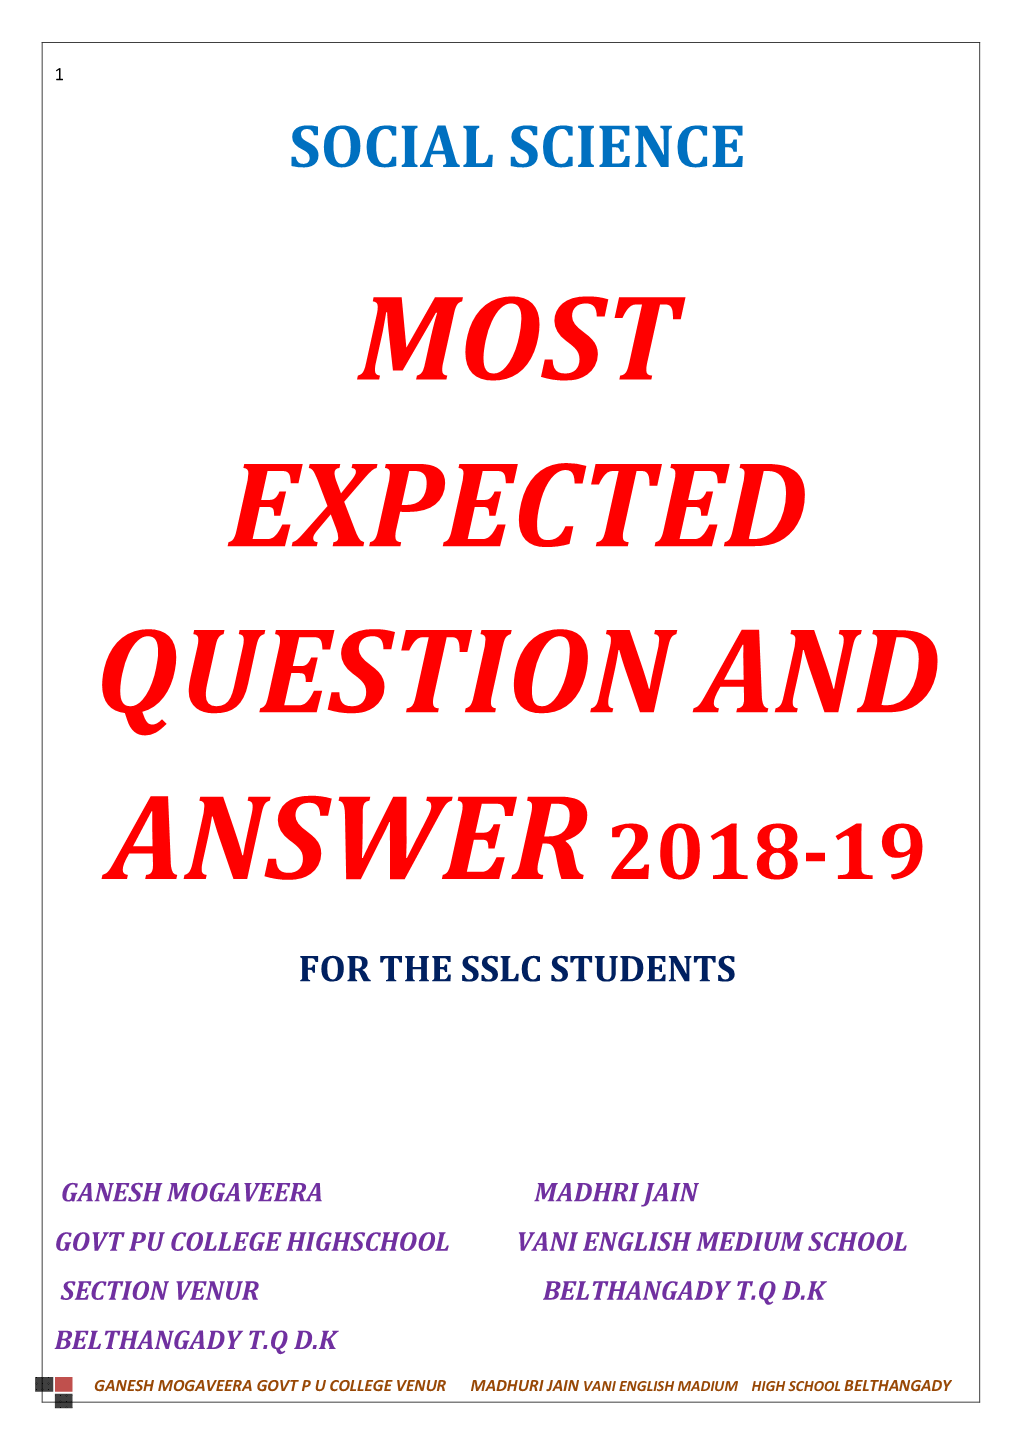 Most Expected Question and Answer2018-19